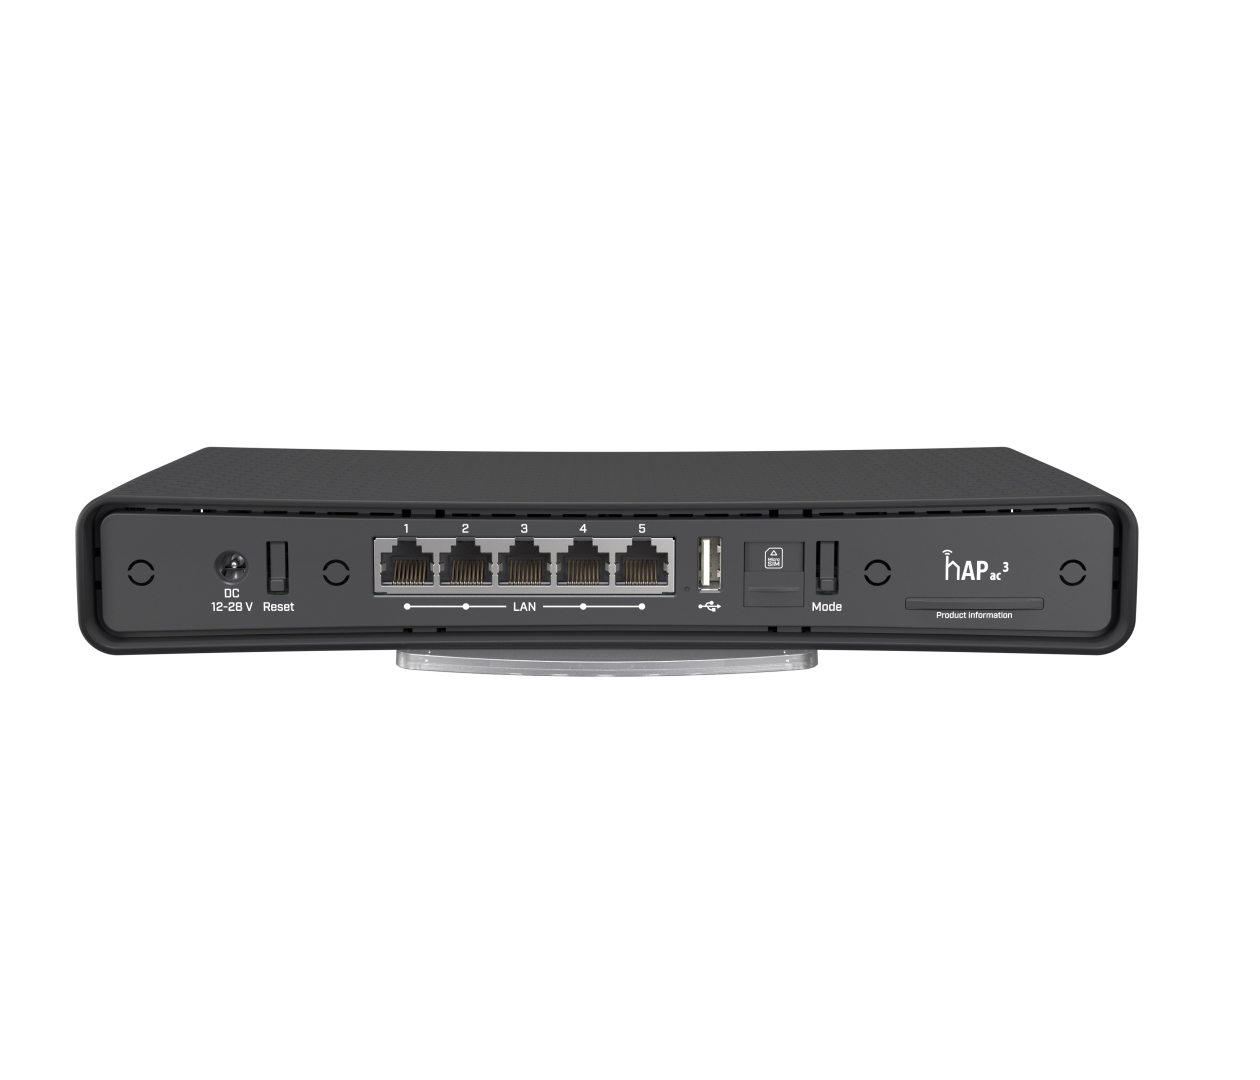 søsyge solsikke øverst MIKROTIK Wireless dual-band router with LTE support and 5 Gigabit Ethernet  ports , hAP ac3 LTE6 kit (RBD53GR-5HacD2HnD&R11e-LTE6) - The source for  WiFi products at best prices in Europe - wifi-stock.com